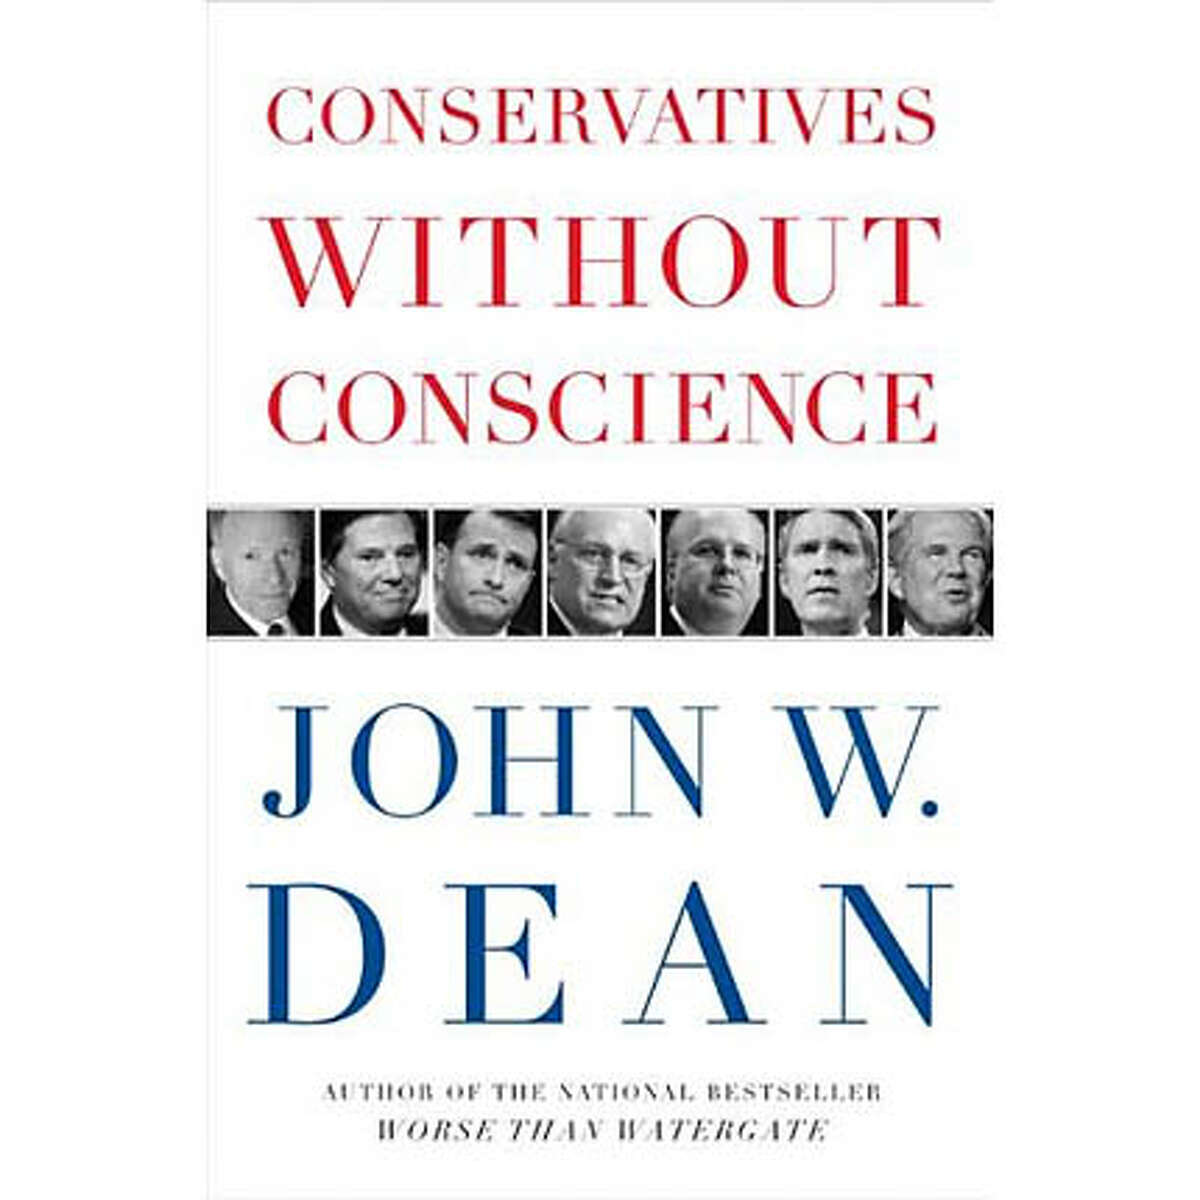 "Conservatives Without Conscience" by John W. Dean